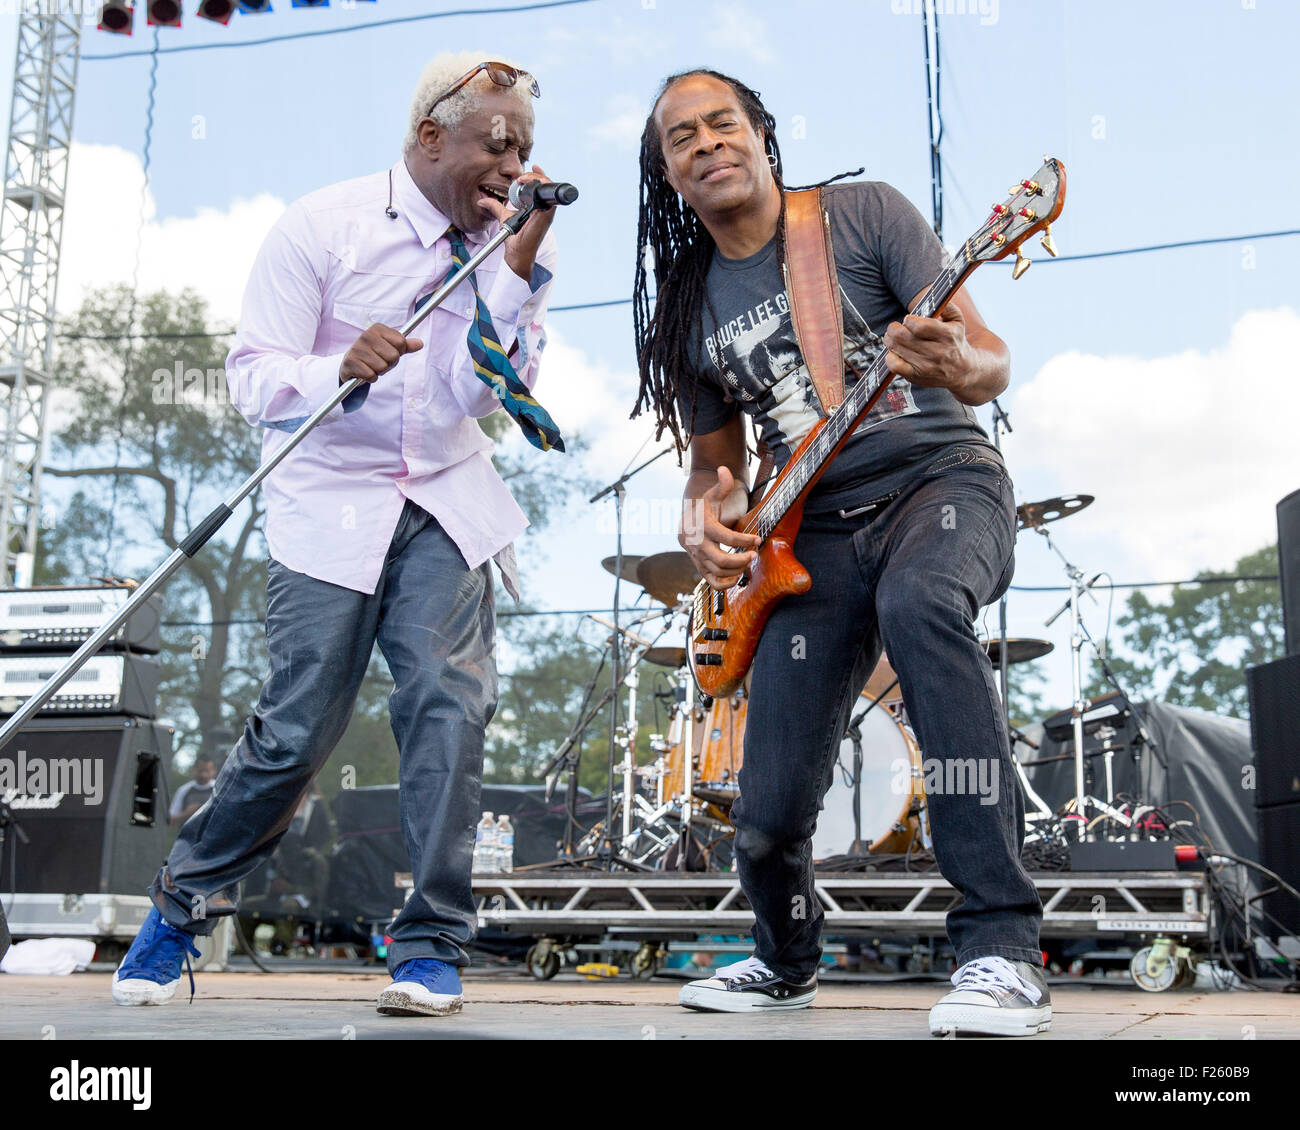 Chicago, Illinois, USA. 11th Sep, 2015. COREY GLOVER (L) and DOUG WIMBISH of Living Colour perform live during Riot Fest at Douglas Park in Chicago, Illinois Credit:  Daniel DeSlover/ZUMA Wire/Alamy Live News Stock Photo